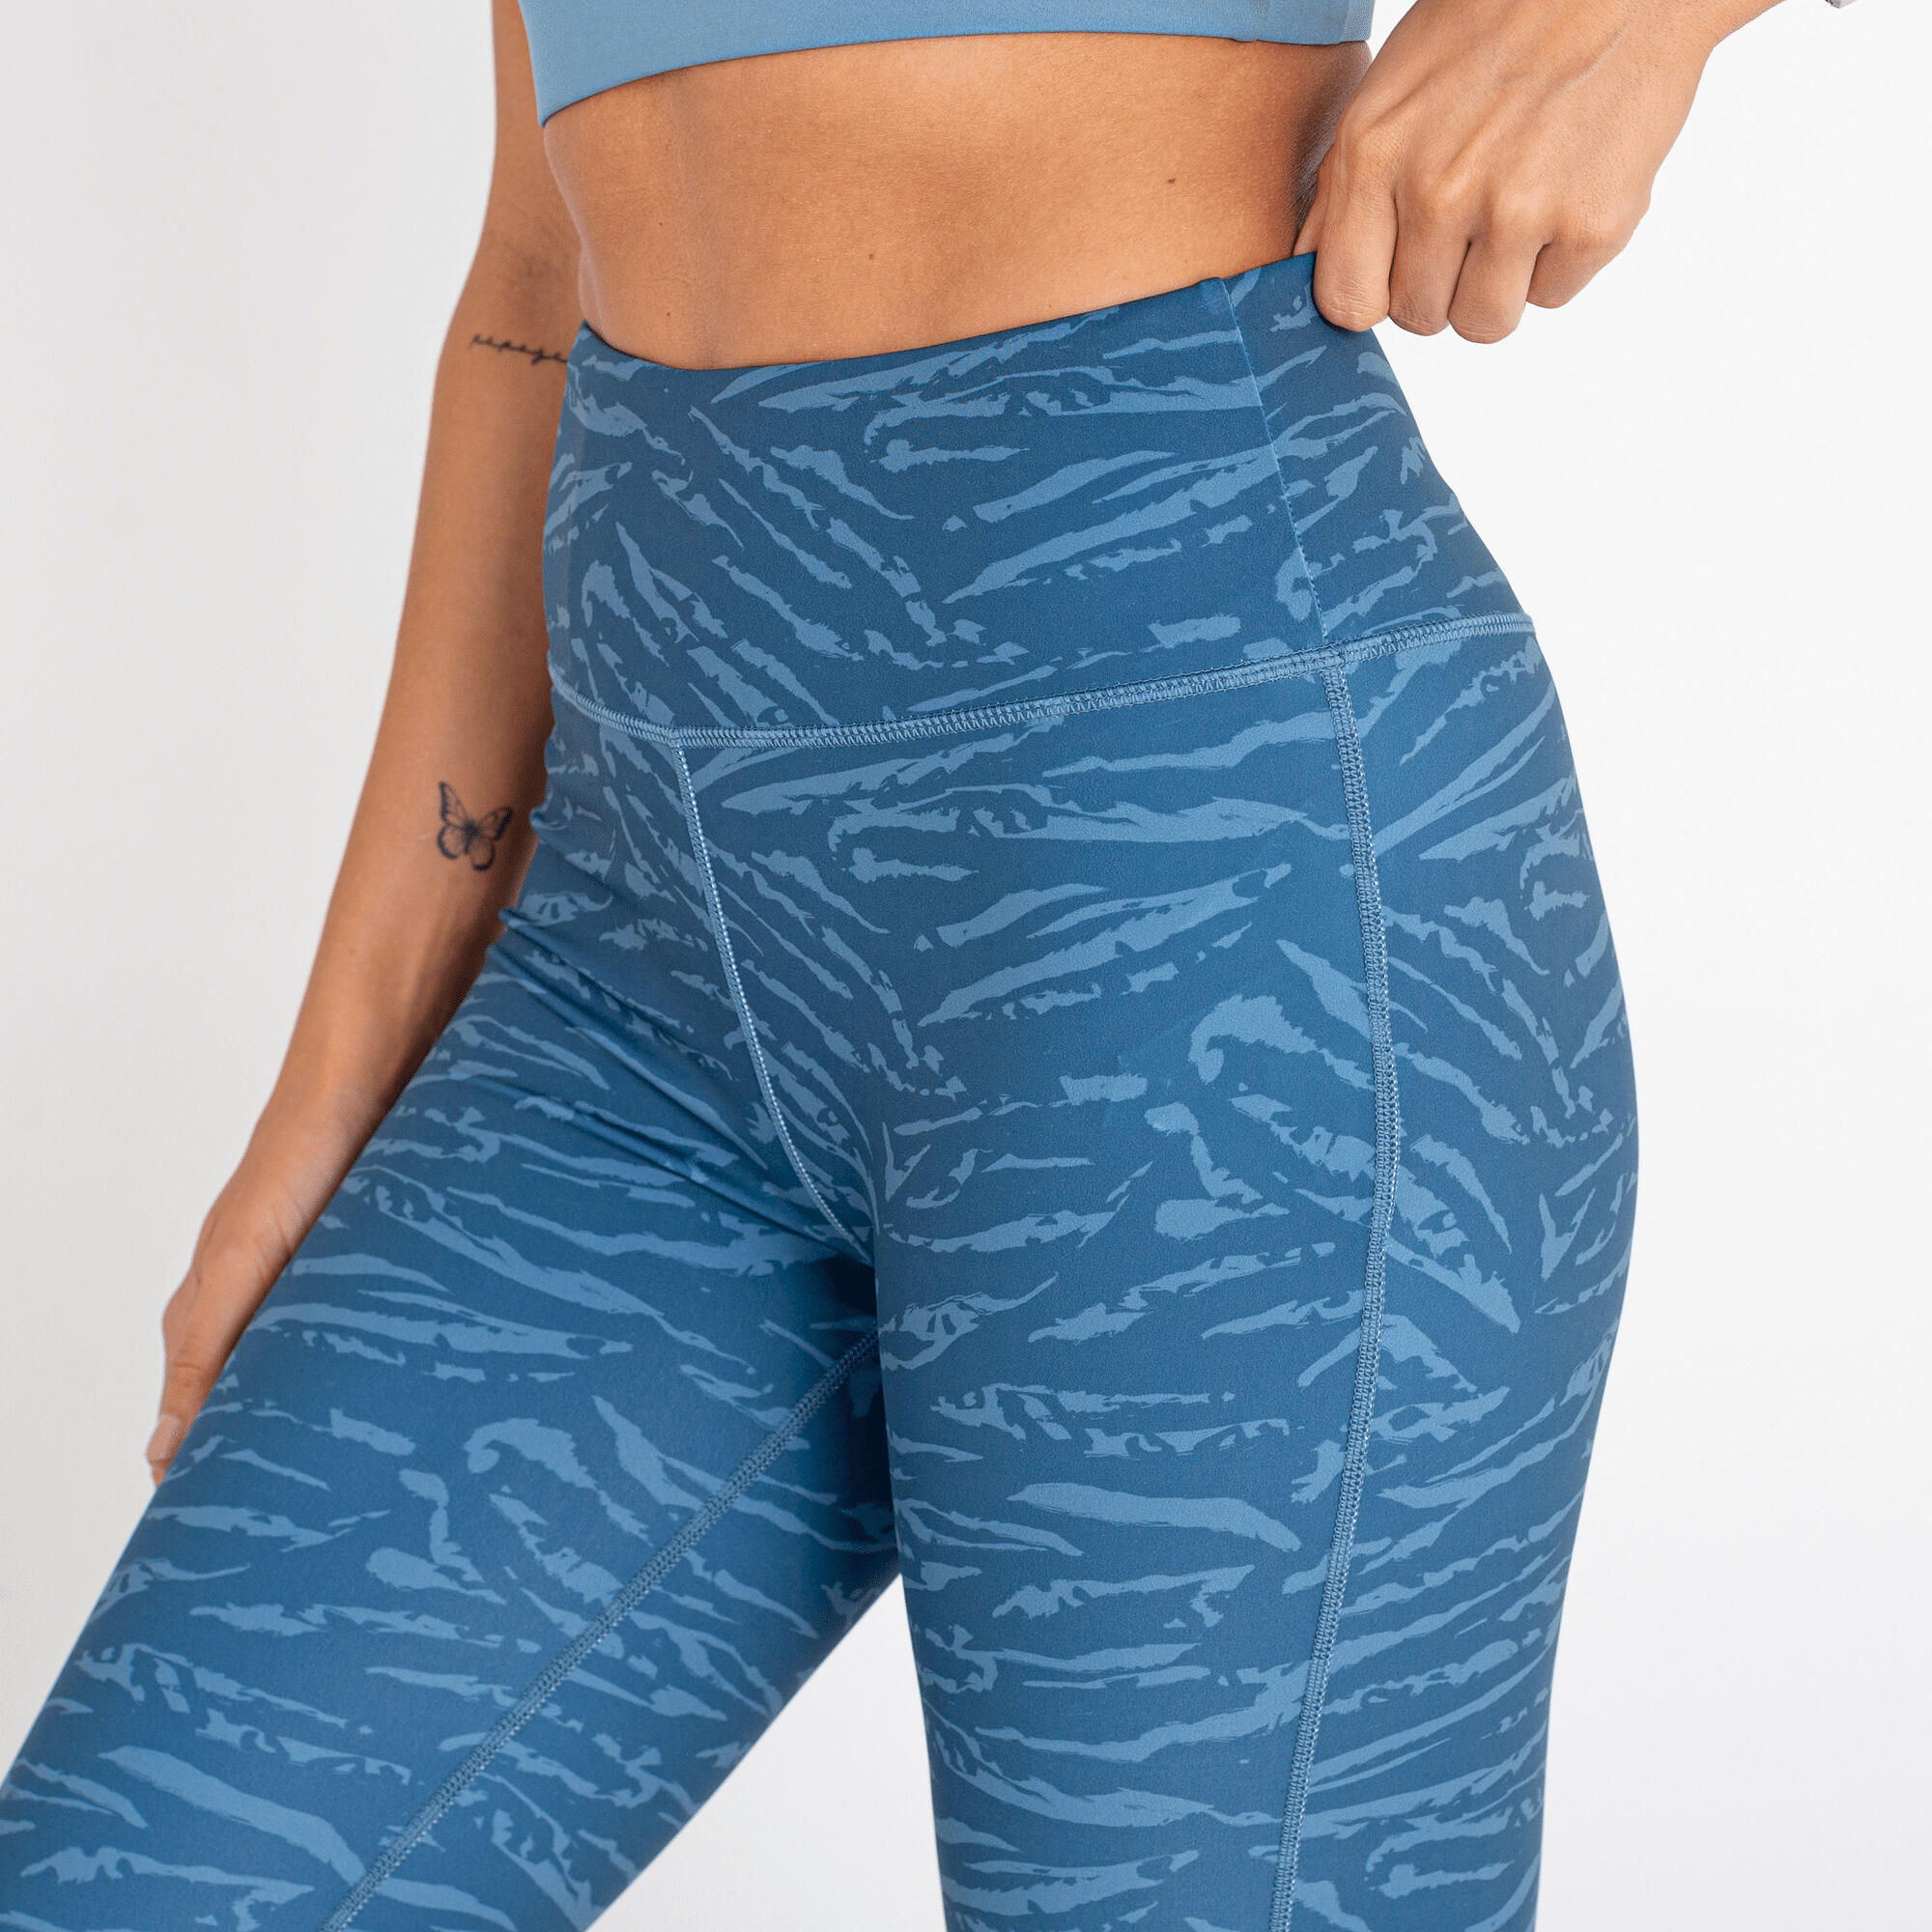 Womens/Ladies Influential Tiger Print Recycled Leggings (Orion Grey) 4/5